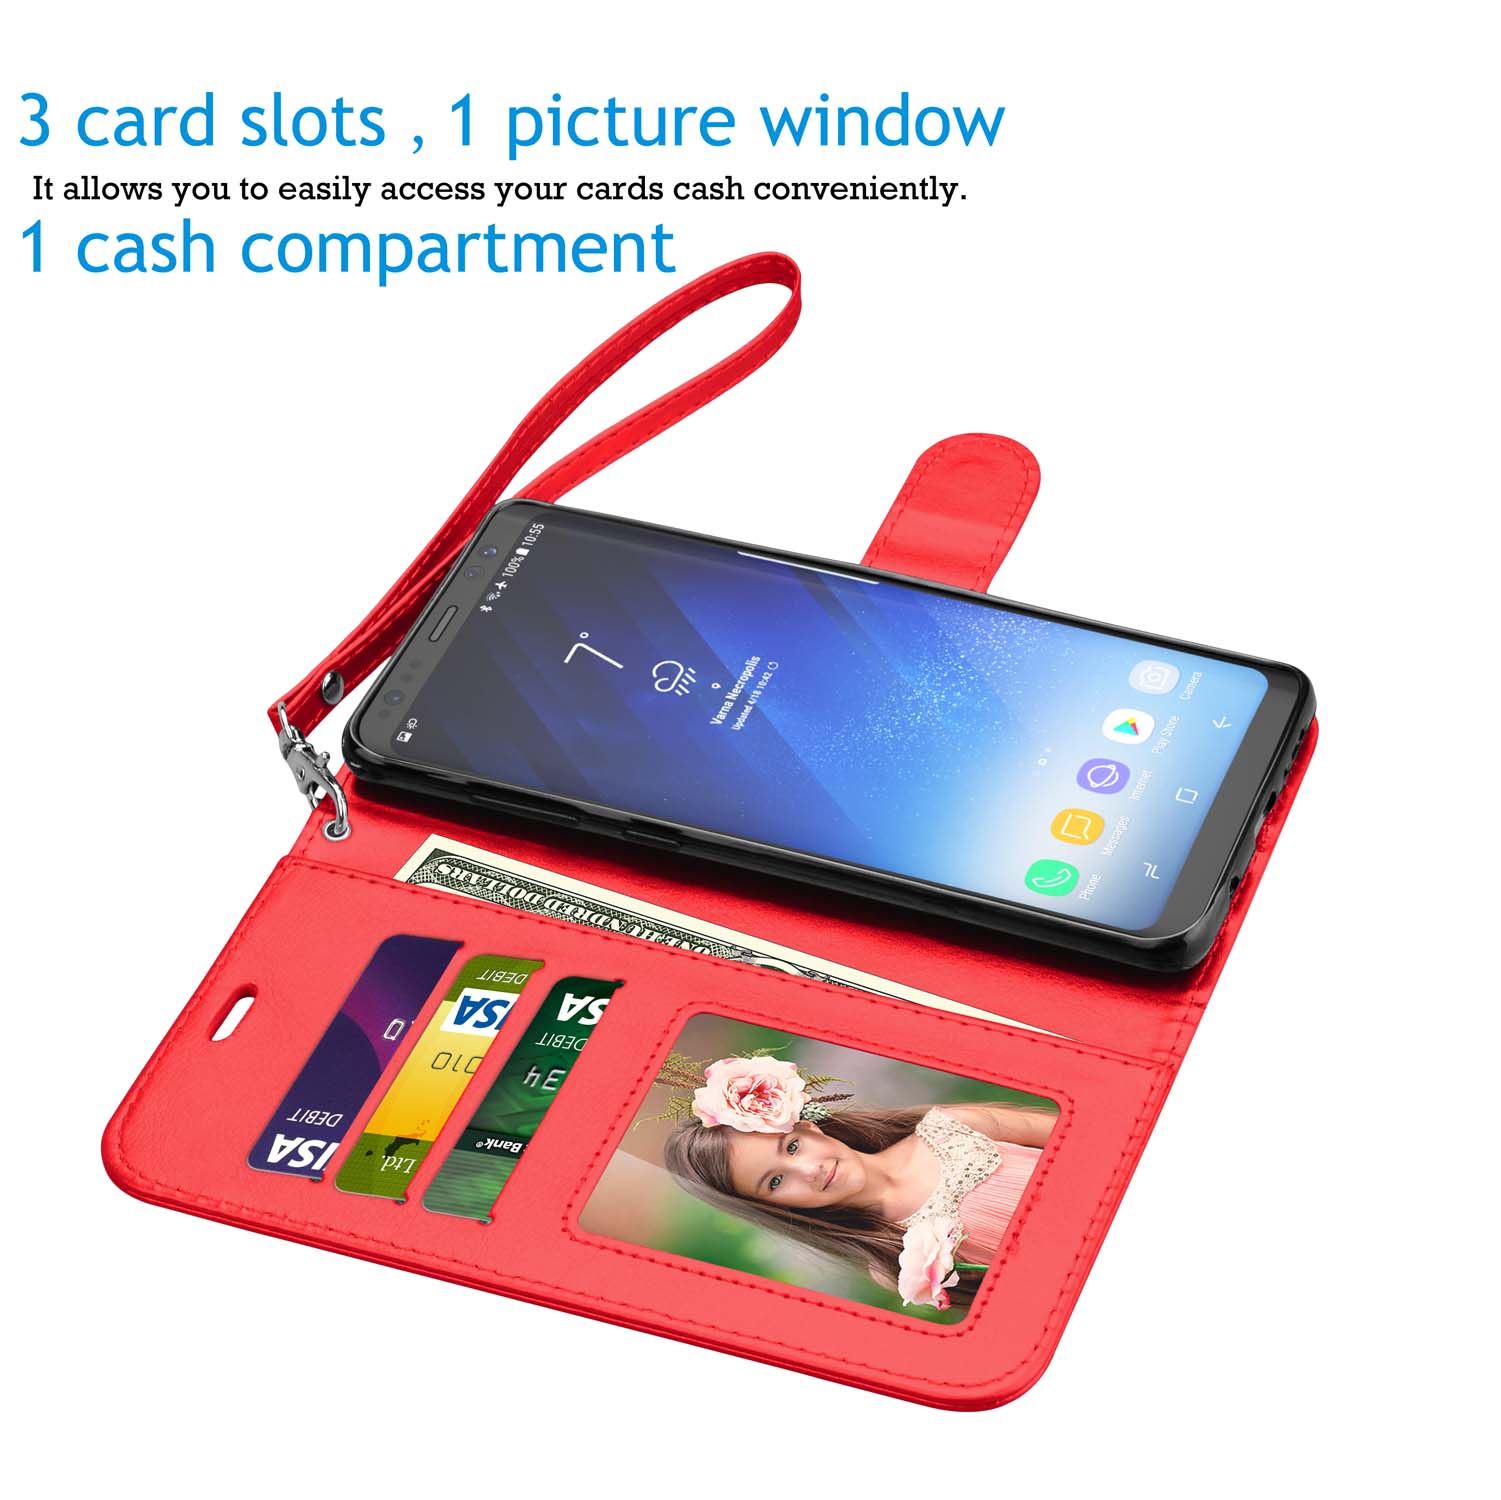 Tekcoo Galaxy S8 / S8 Plus Wallet Case, for Galaxy S8 / S8+ PU Leather Case, Tekcoo [Red] PU Leather [3 Card Slots] ID Credit Flip Cover [Kickstand] Cover & Wrist Strap - image 3 of 5